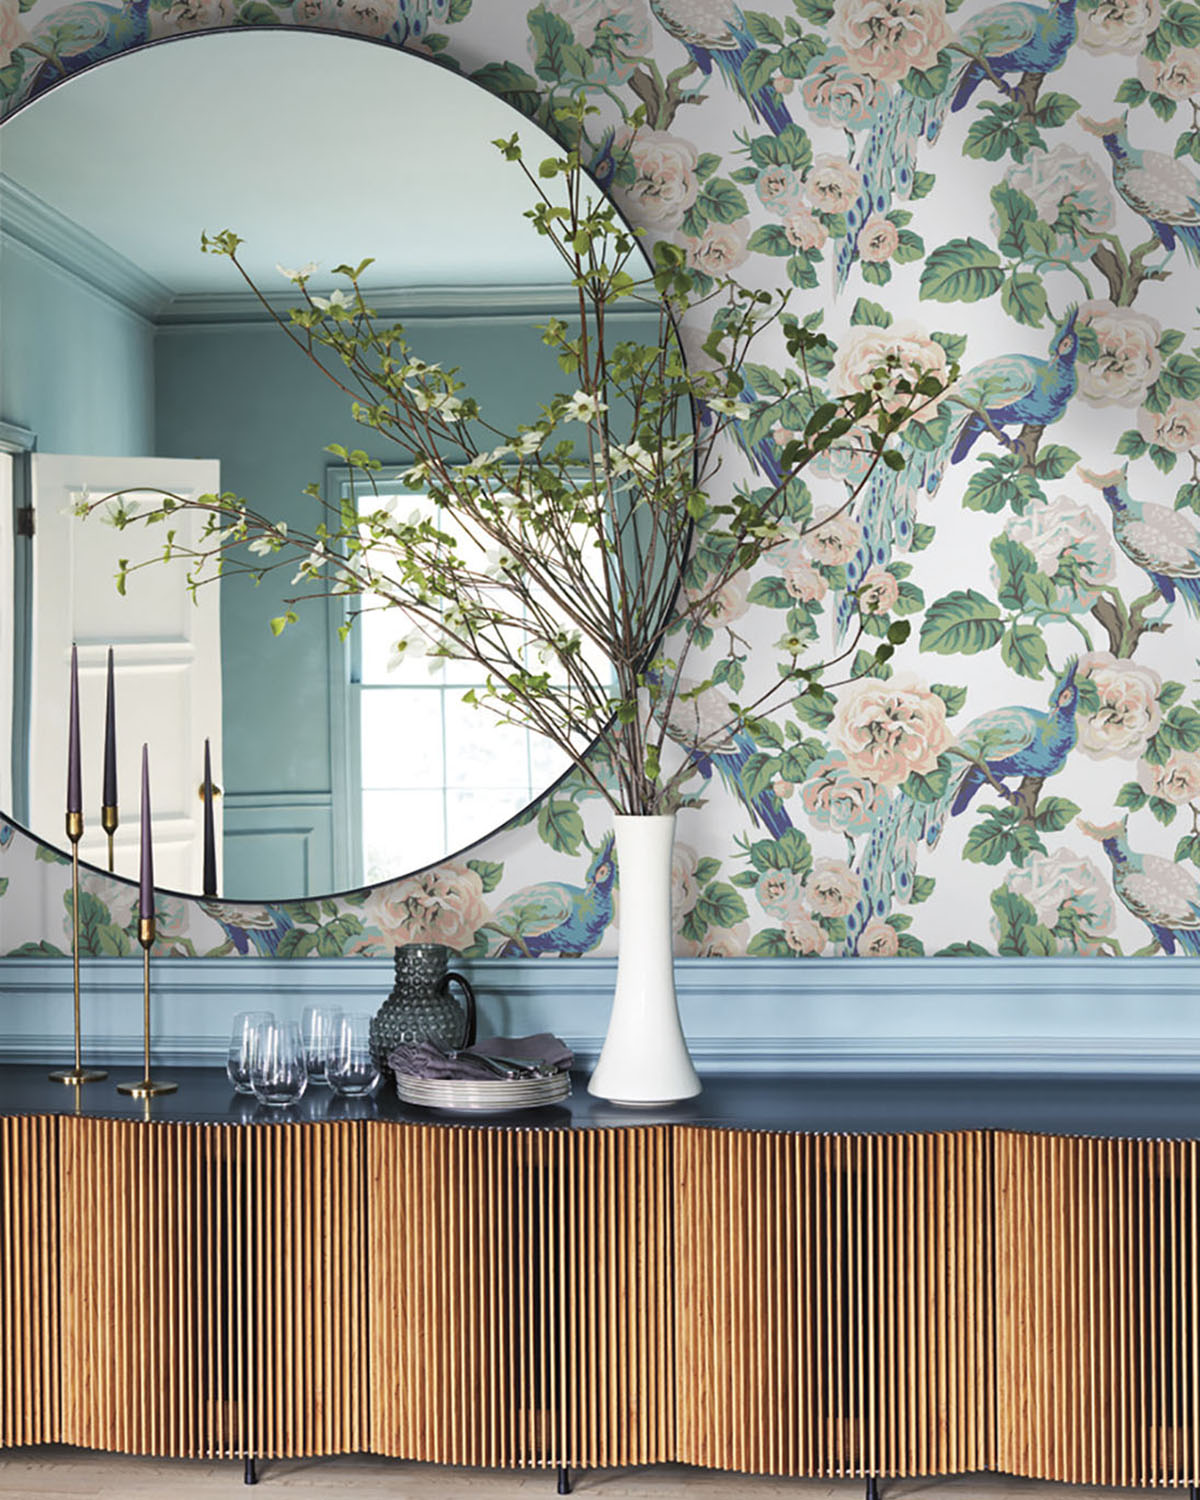 Garden Plume, a botanical wallpaper with birds from York Wallcoverings